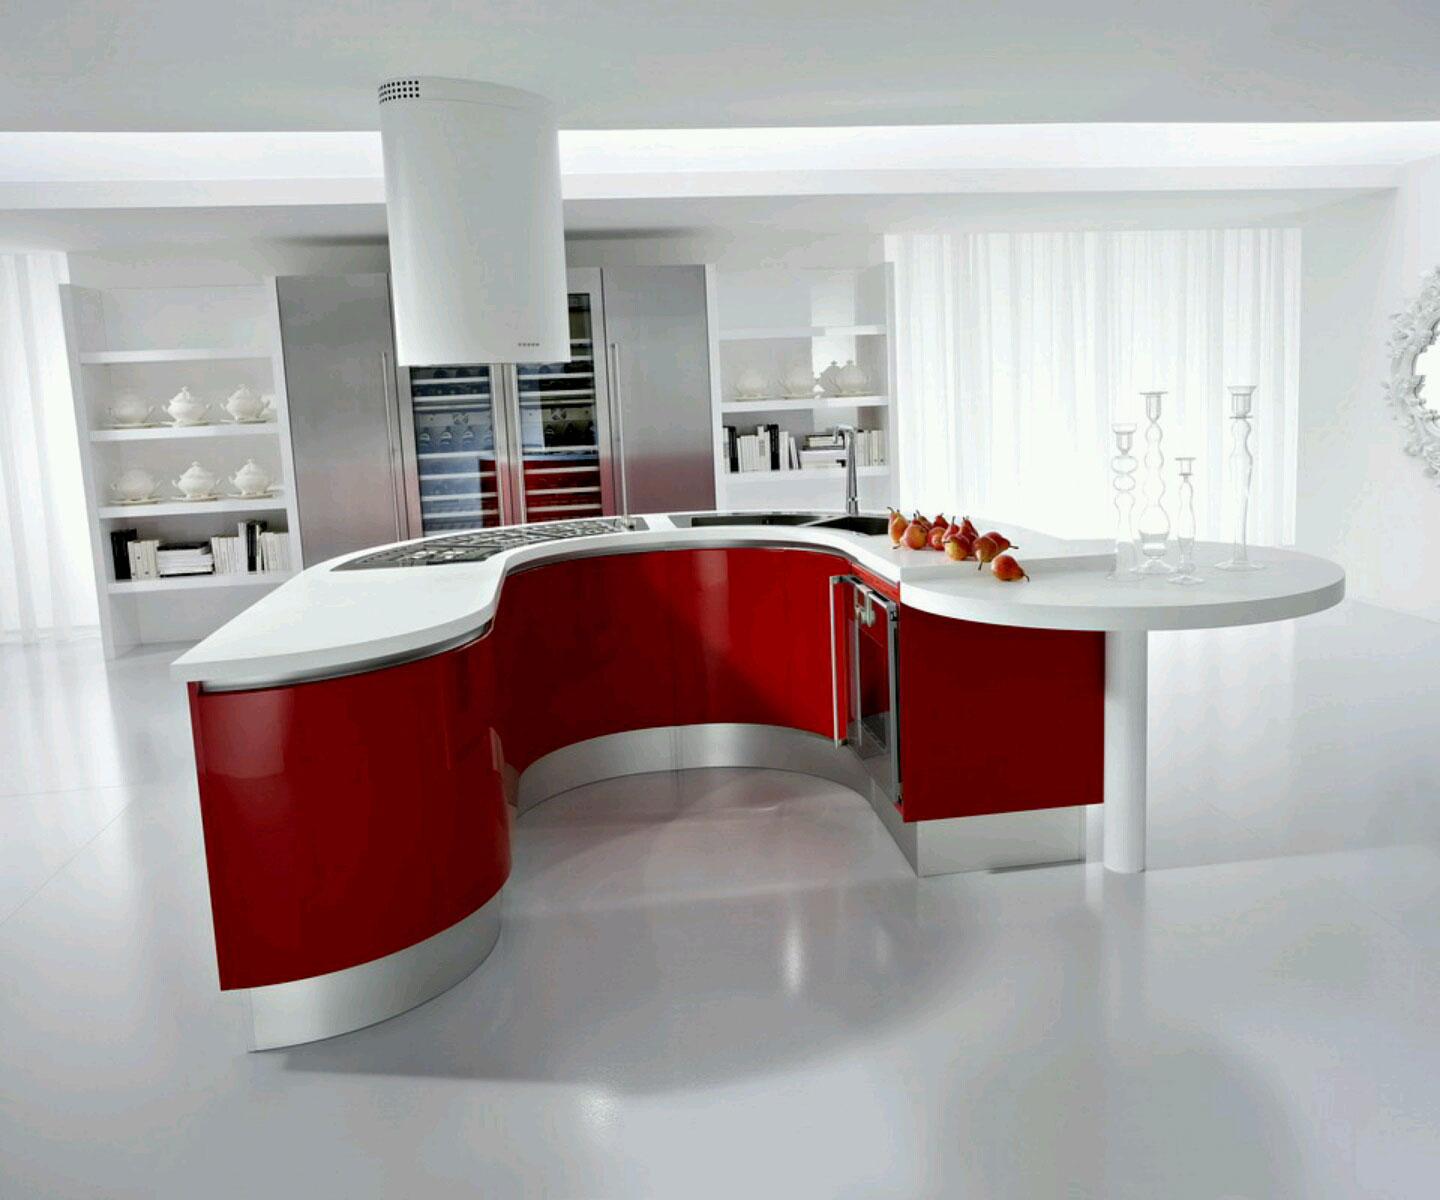 White Red With Cool White Red Kitchen Interior With Modern Kitchen Cabinets Completed With Electric Range And Countertop Also Furnished With Double Basin Sink Kitchen Modern Kitchen Cabinets Design Inspiration